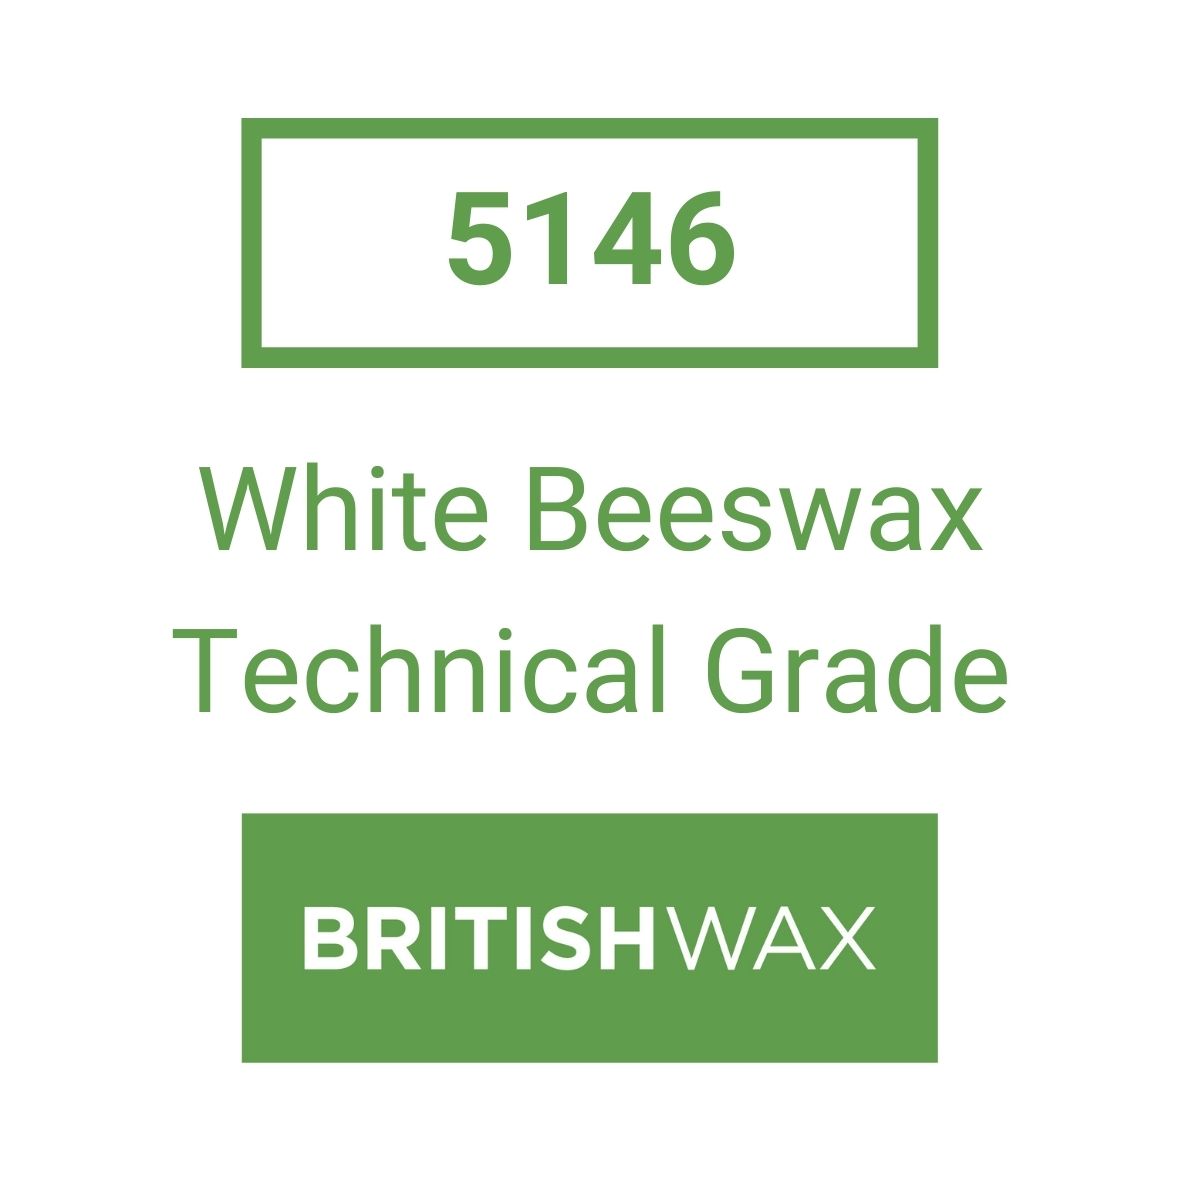 5146 White Beeswax Technical Grade